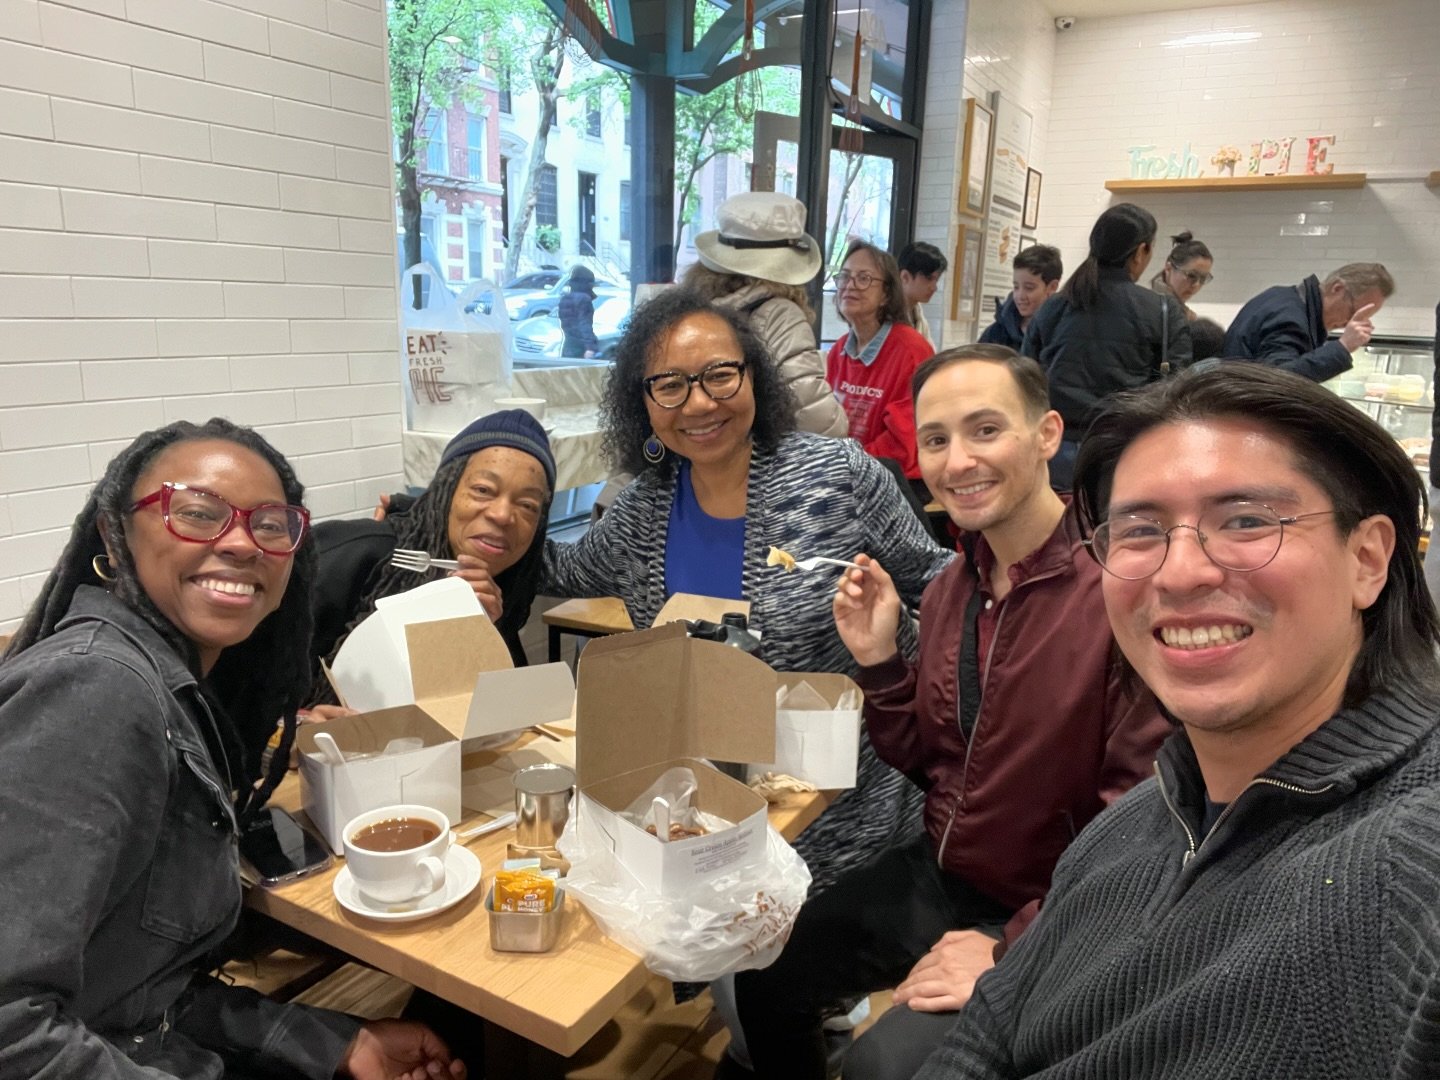 A wind quintet hang after rehearsal &hellip;. introducing these young musicians to the sour cream apple walnut pie at the Little Pie Company.

@chaihorn_nyc @theflutepursuit @playerliz #rehearsal @littlepiecompany #sweettreats